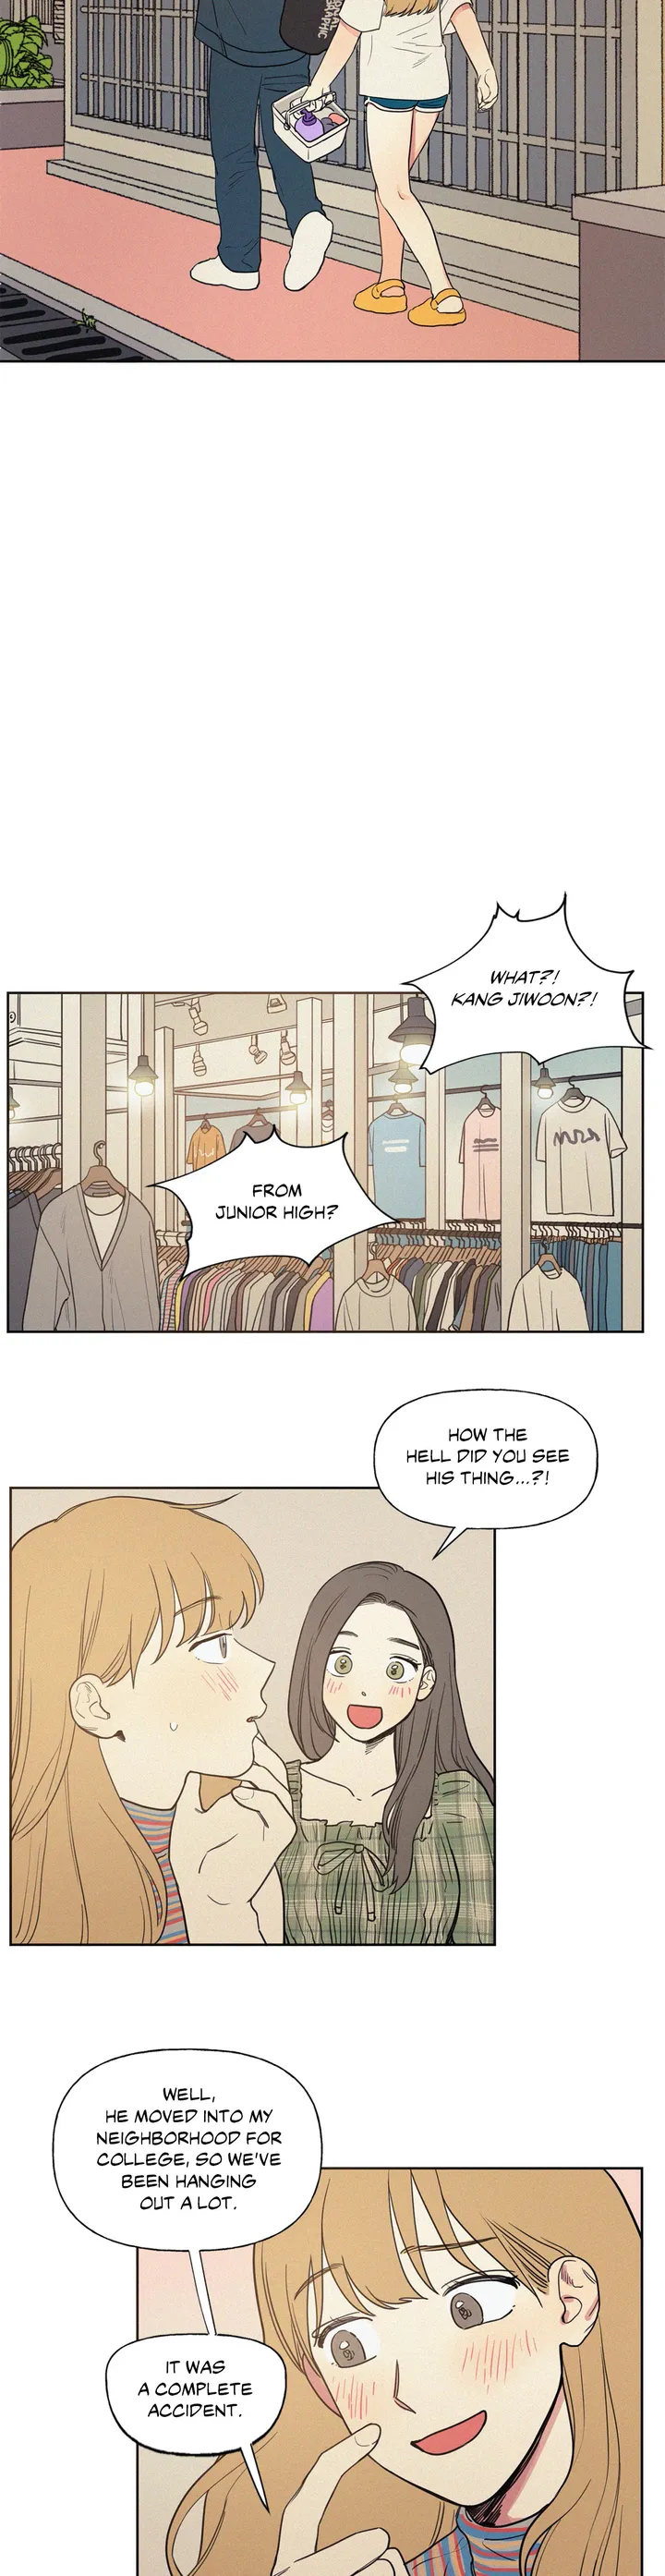 My Friend’s Hidden Charm - Chapter 1 Page 11